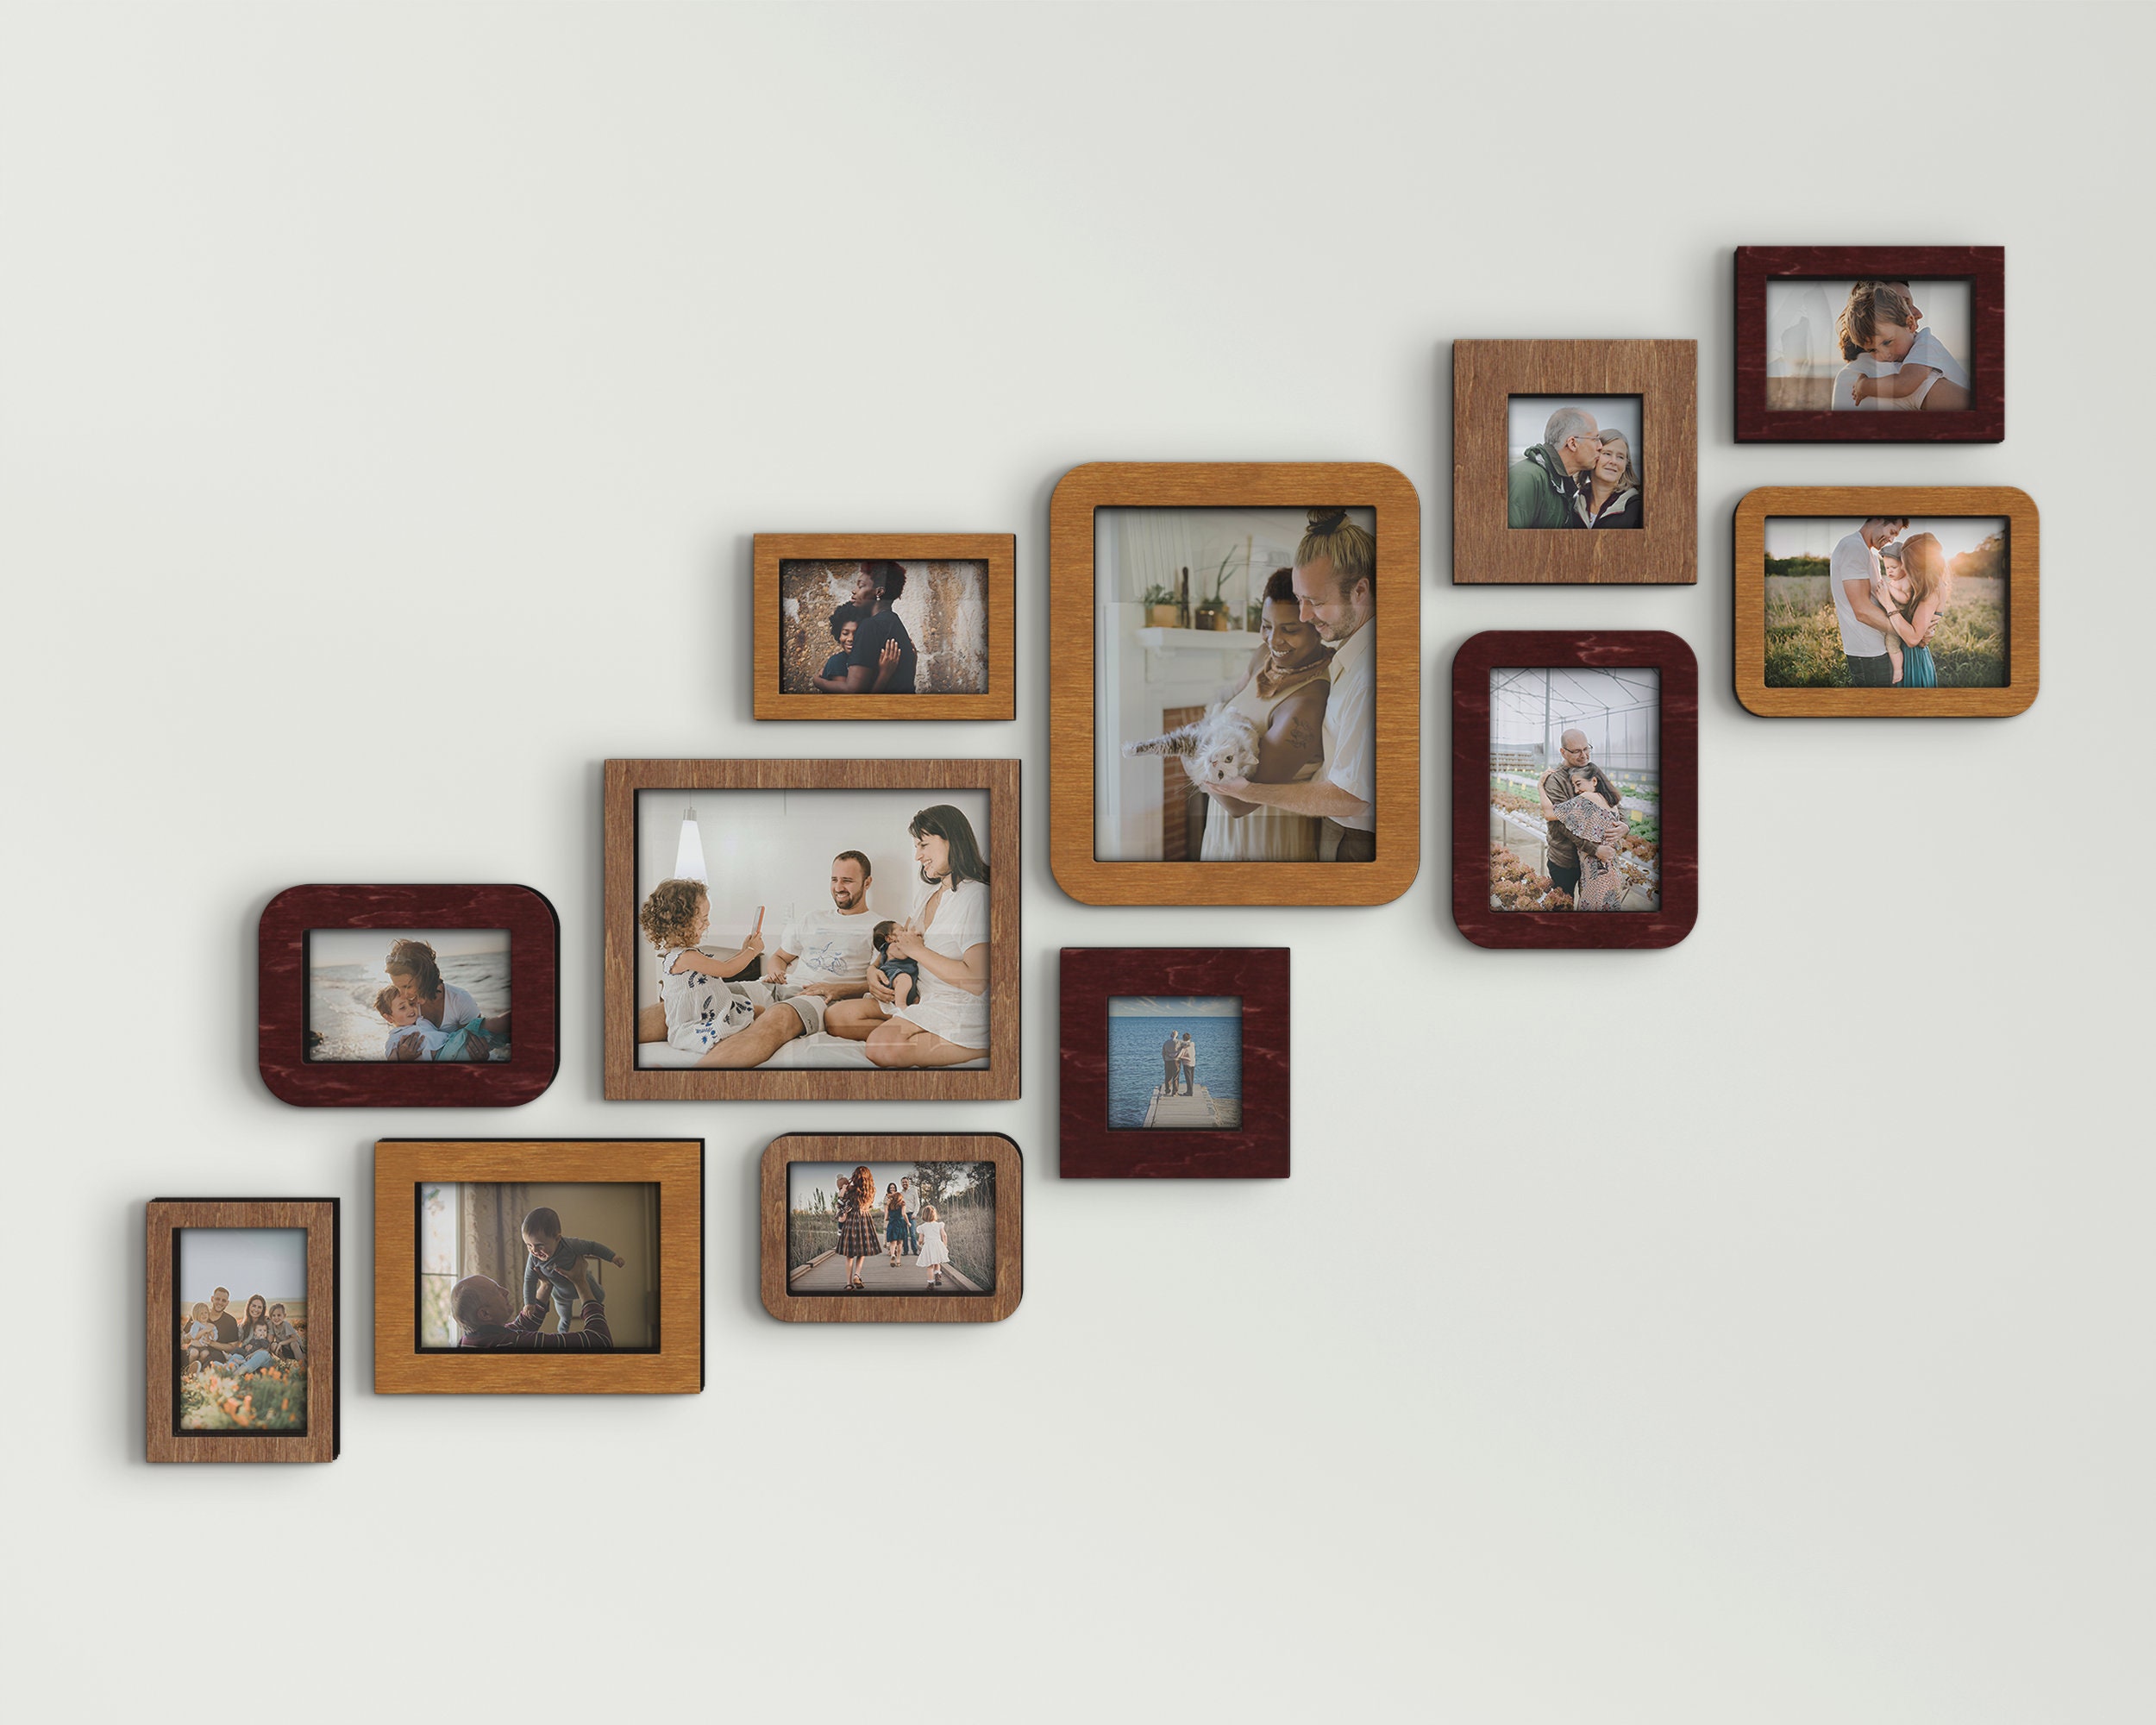  DNGDD Solid Wood Photo Wall Children's Personality Small Photo  Frame Combination Creative Simple Photo Wall Living  Room,Stairs,Restaurant,Bar (Color : A) : Todo lo demás